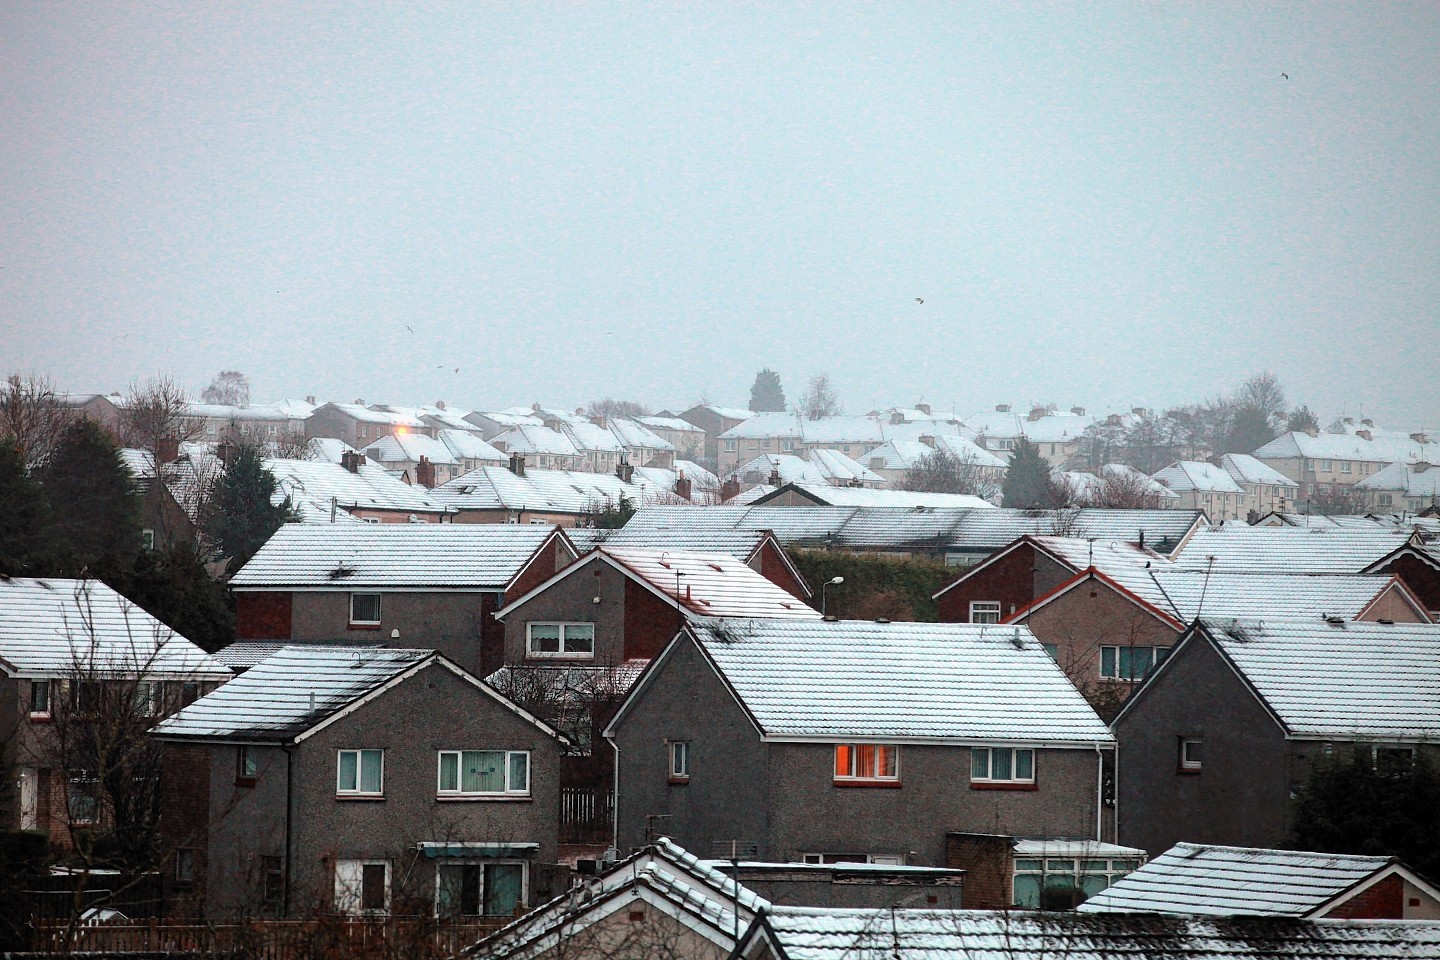 Motherwell, in North Lanarkshire is also covered in snow